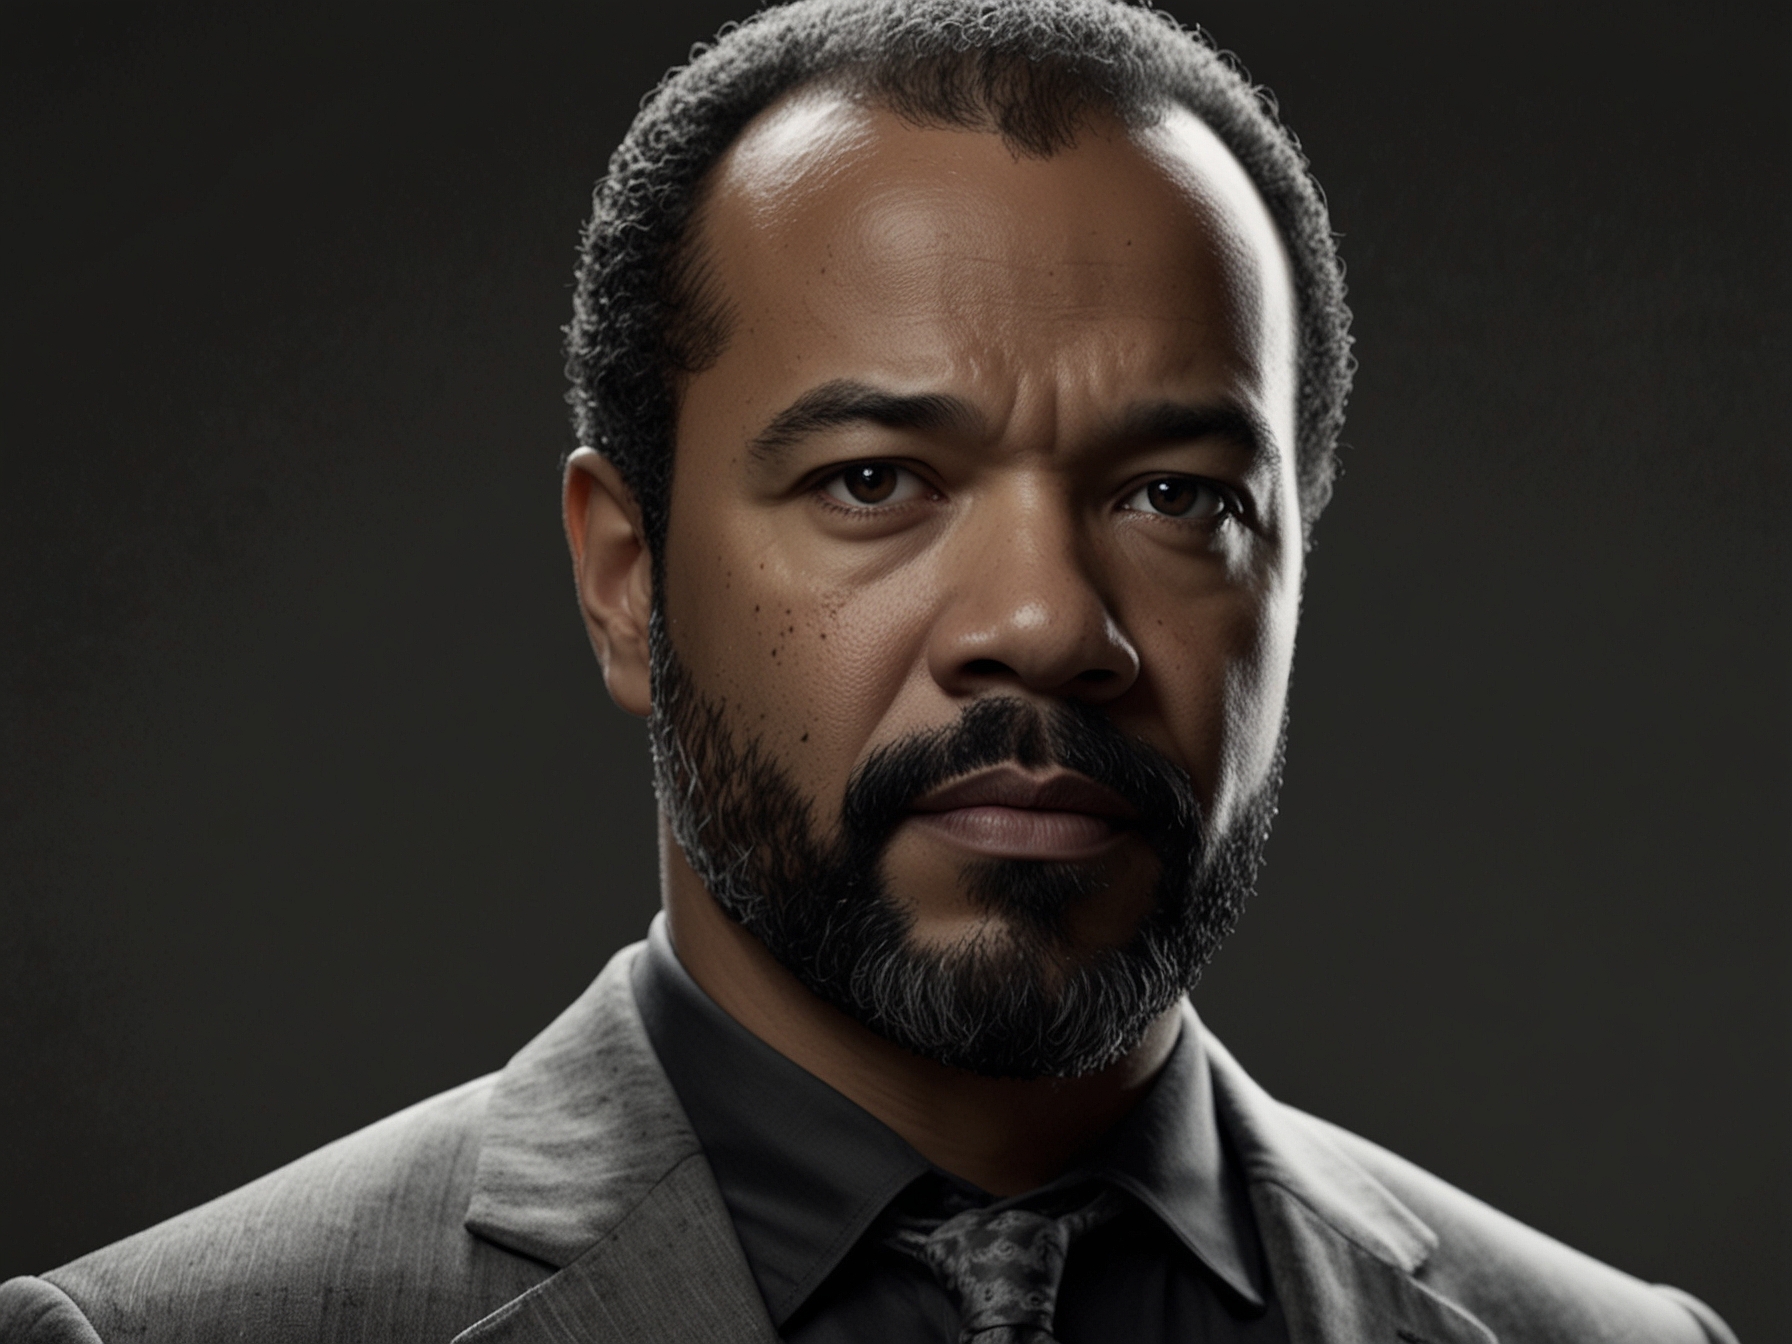 Jeffrey Wright, known for his roles in 'Westworld' and 'American Fiction,' joins the cast of Paramount+'s 'The Agency,' enhancing the series with his experience and gravitas.